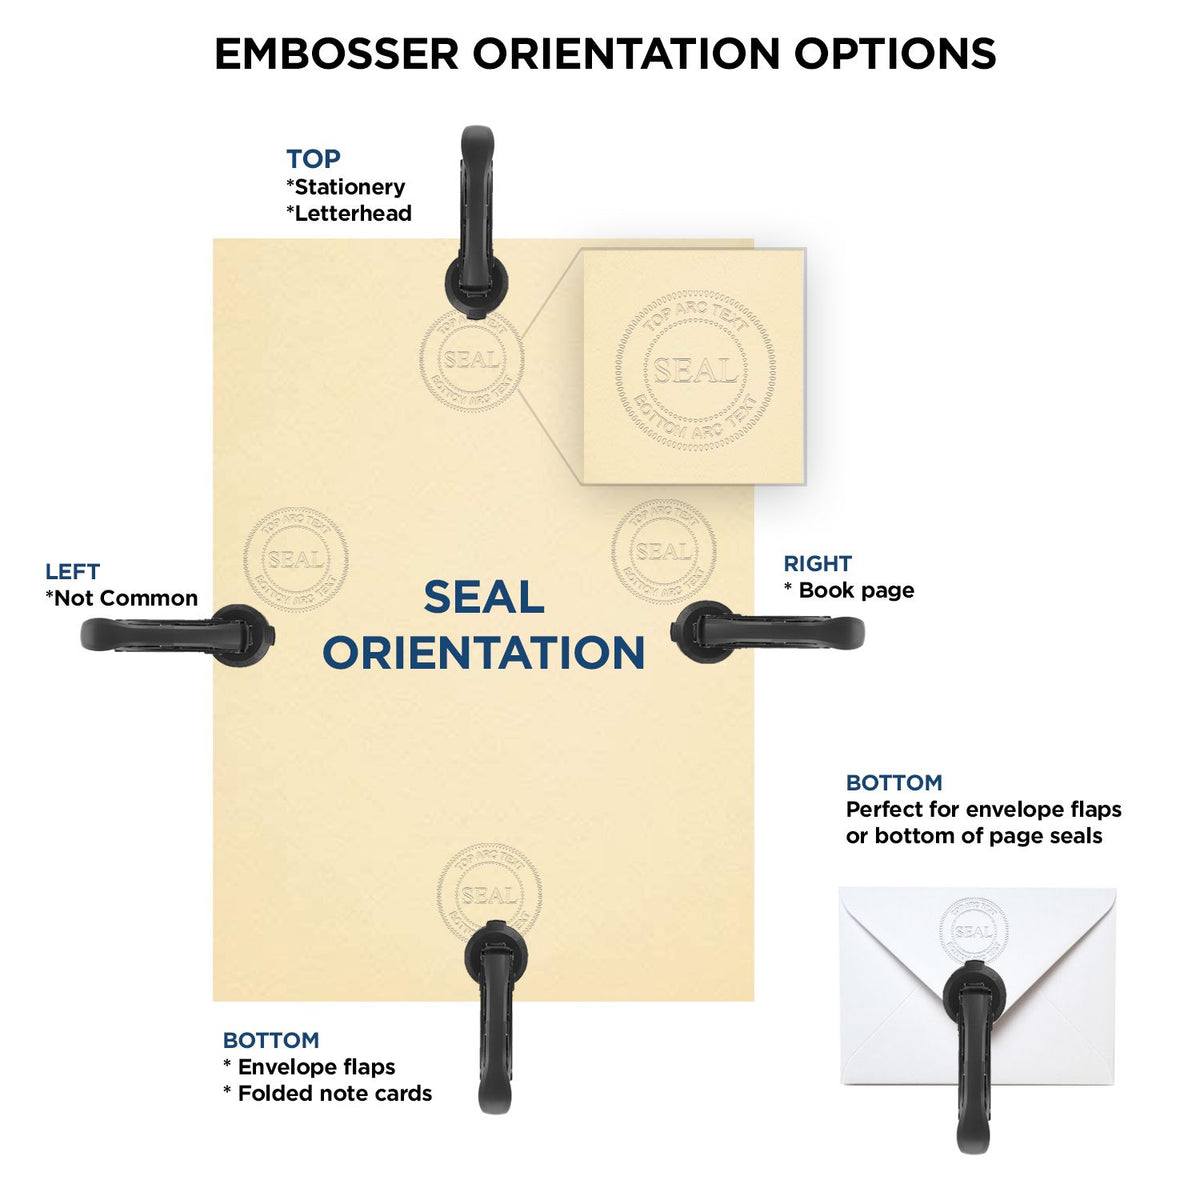 An infographic for the Handheld Colorado Land Surveyor Seal showing embosser orientation, this is showing examples of a top, bottom, right and left insert.